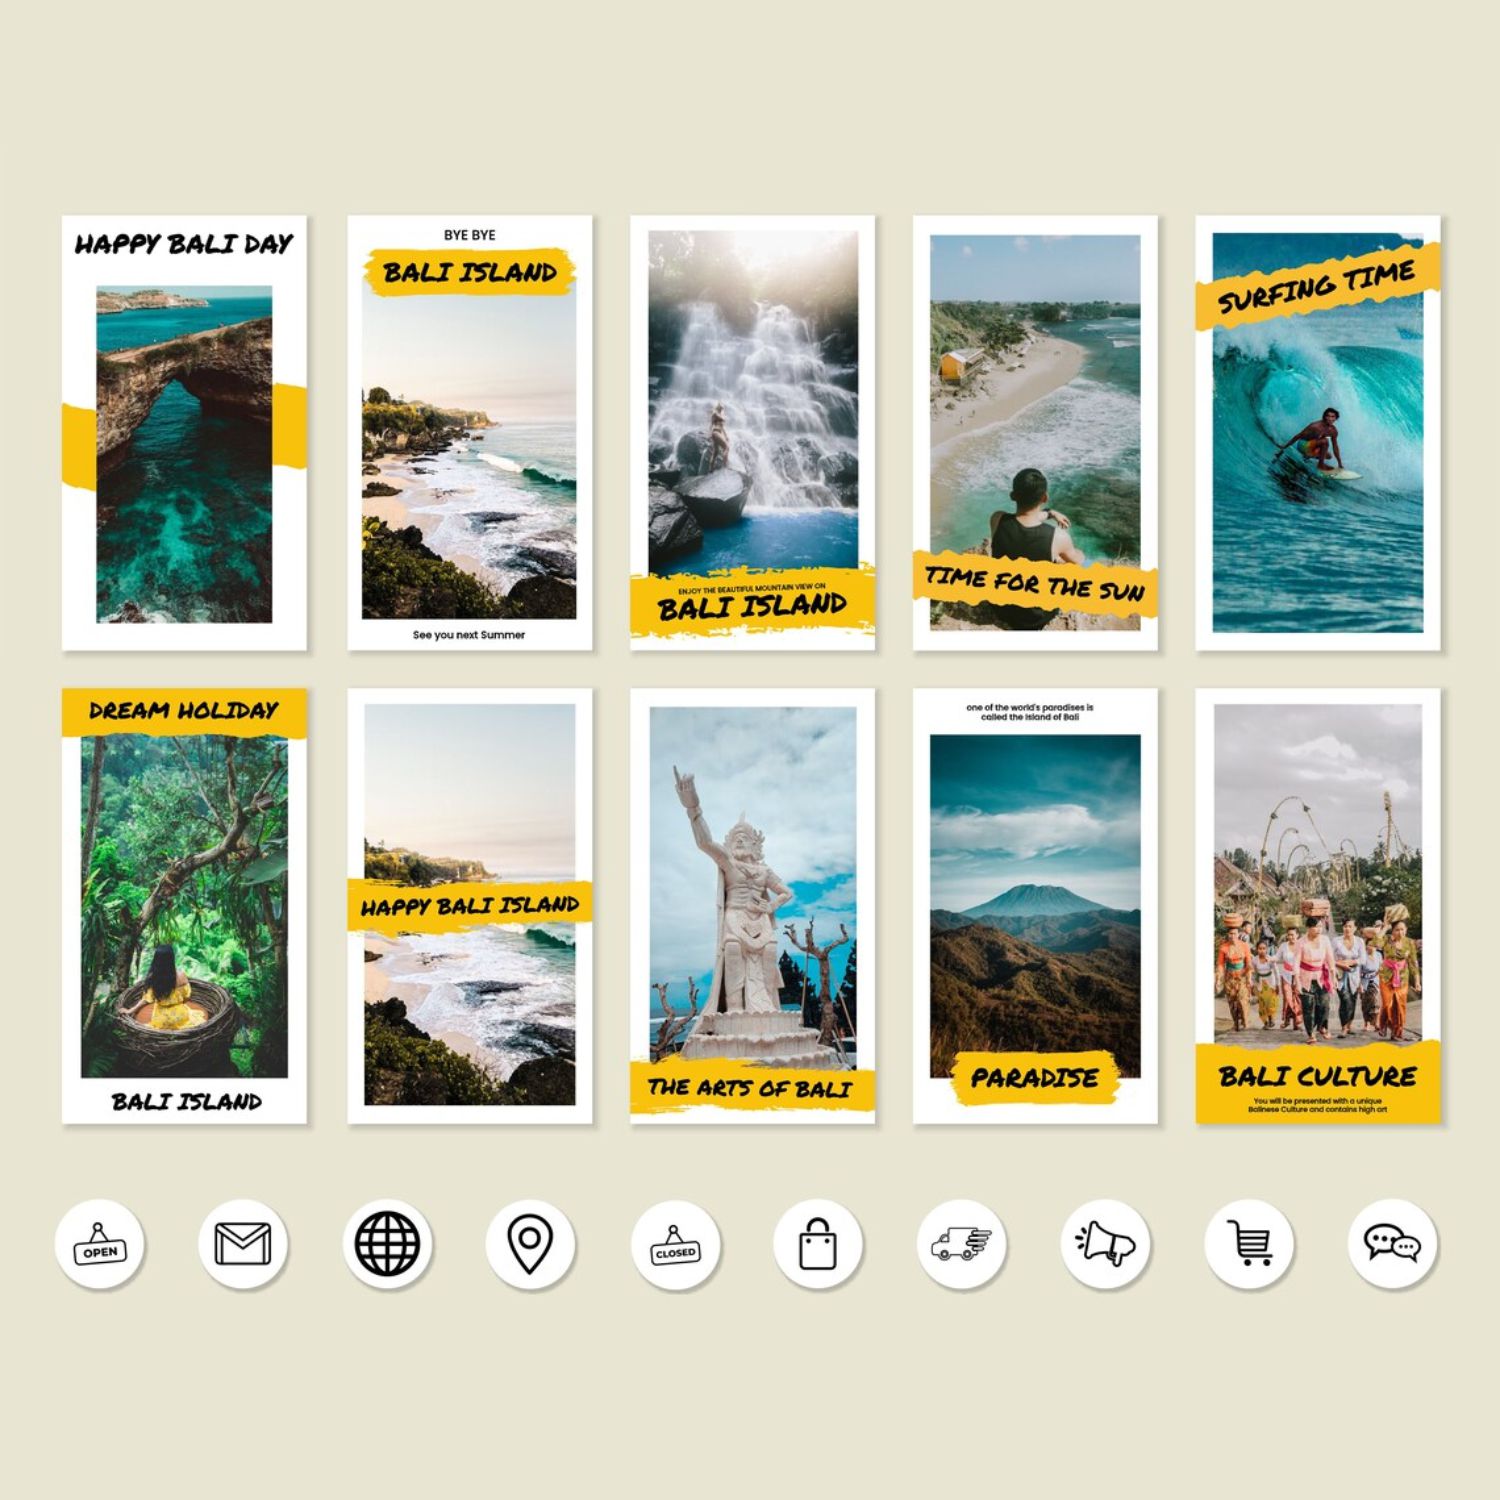 Marketing Summer Holiday Instagram Post Templates Examples.